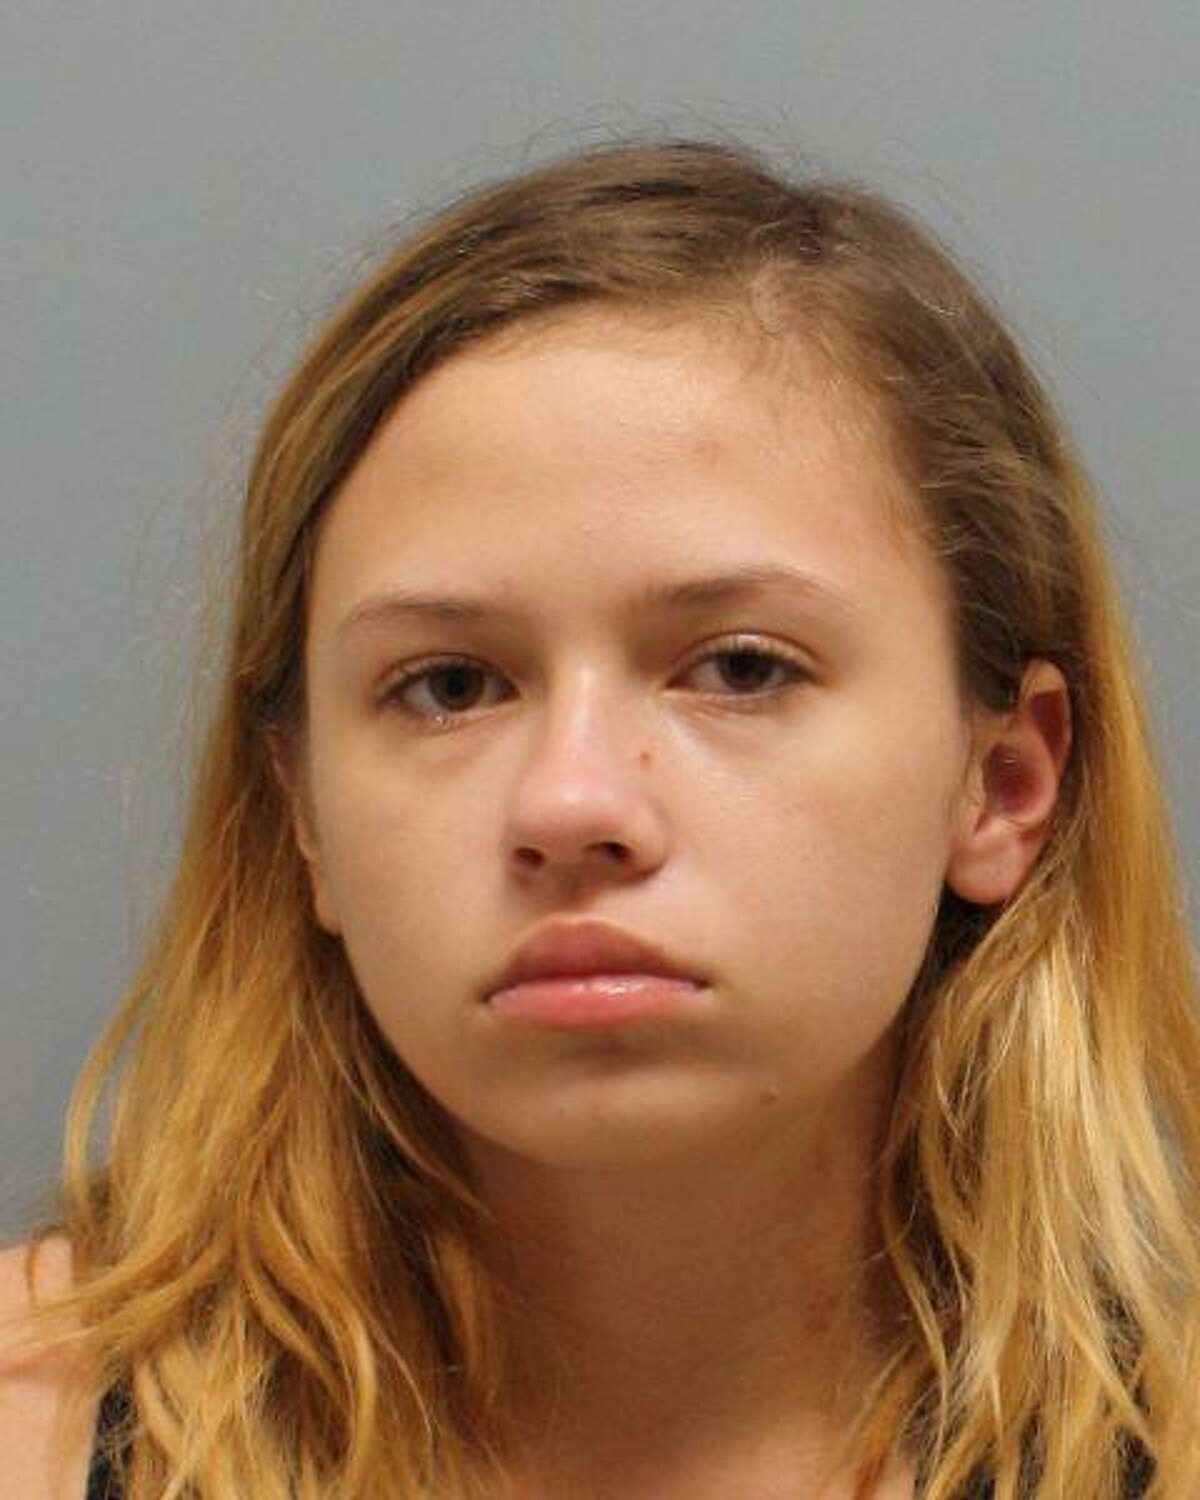 Emma Presler is accused of setting two people on fire — one of whom died.